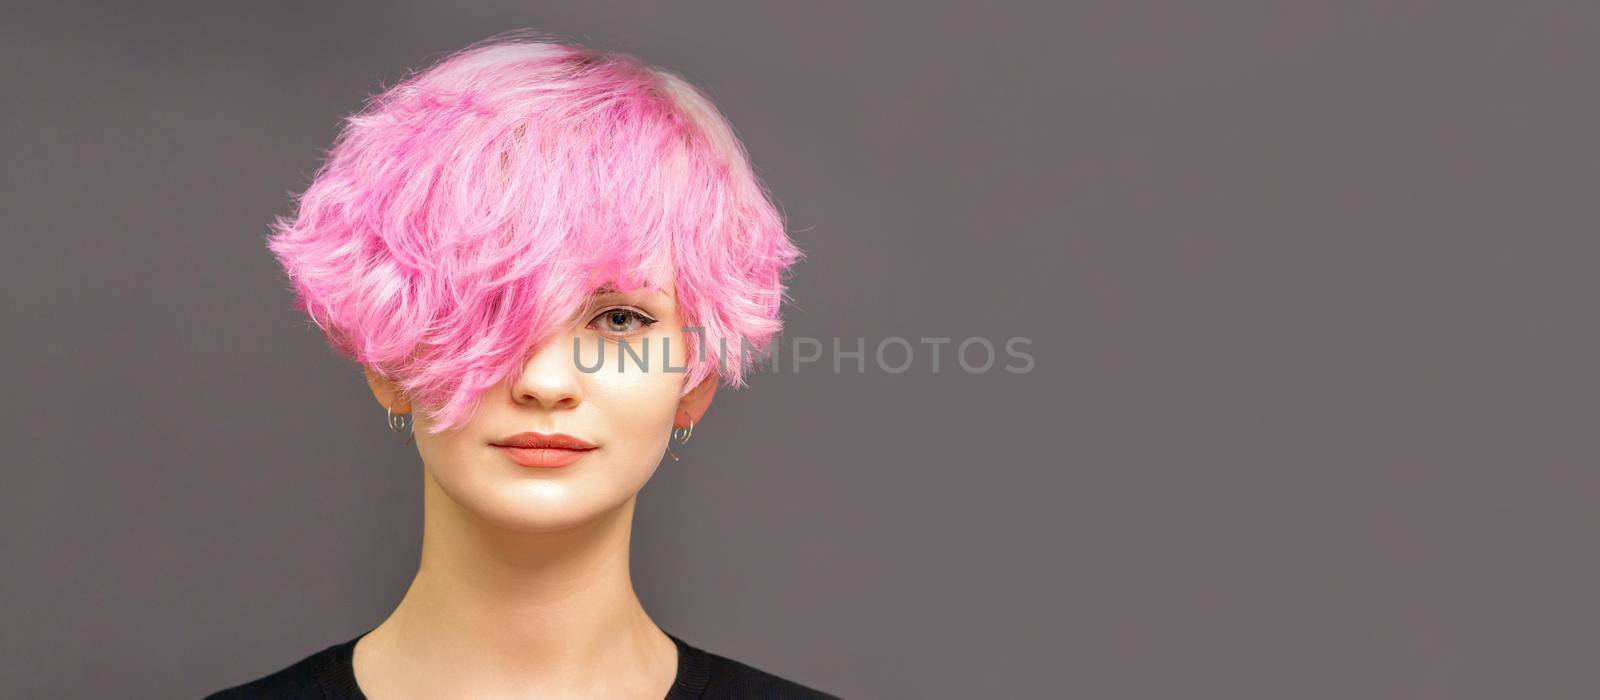 Portrait of fashion model young woman with stylish dyed pink hair in black clothes on dark background